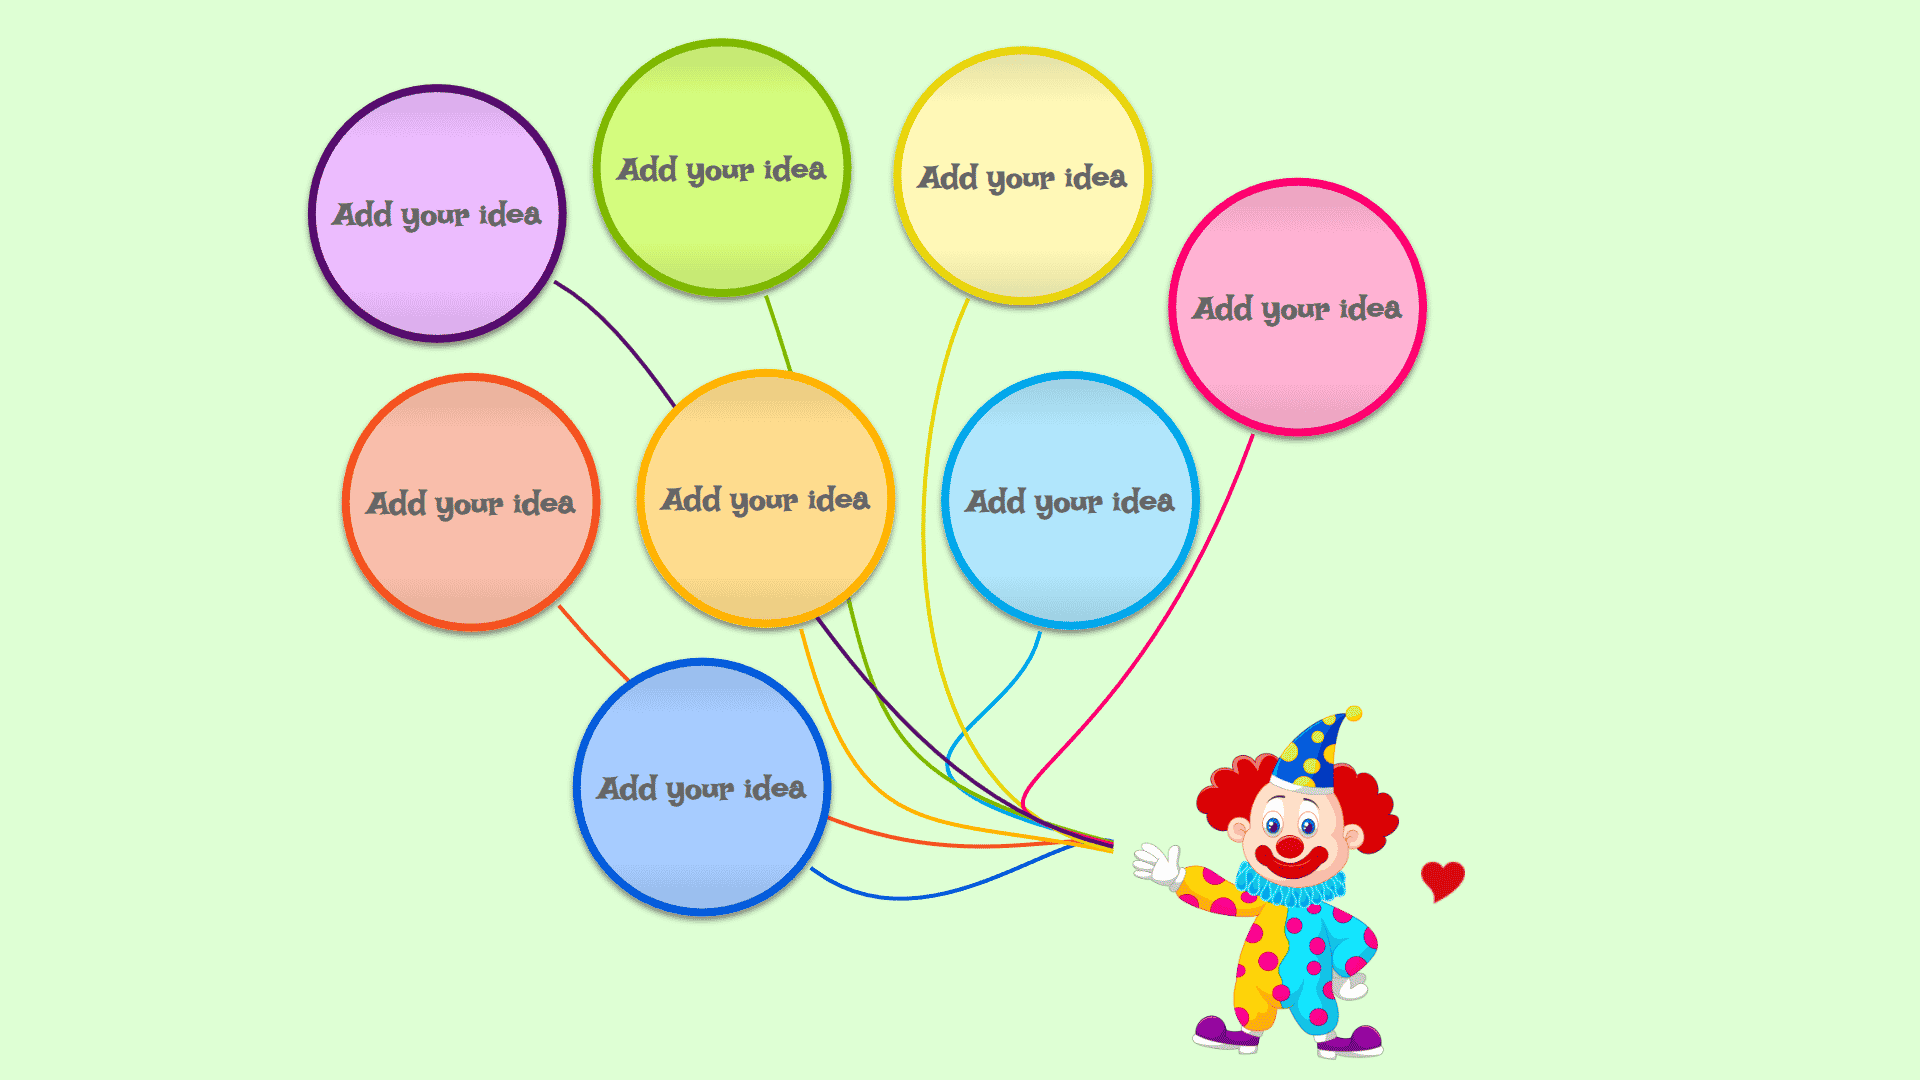 Baloon Brainstorming template for new ideas